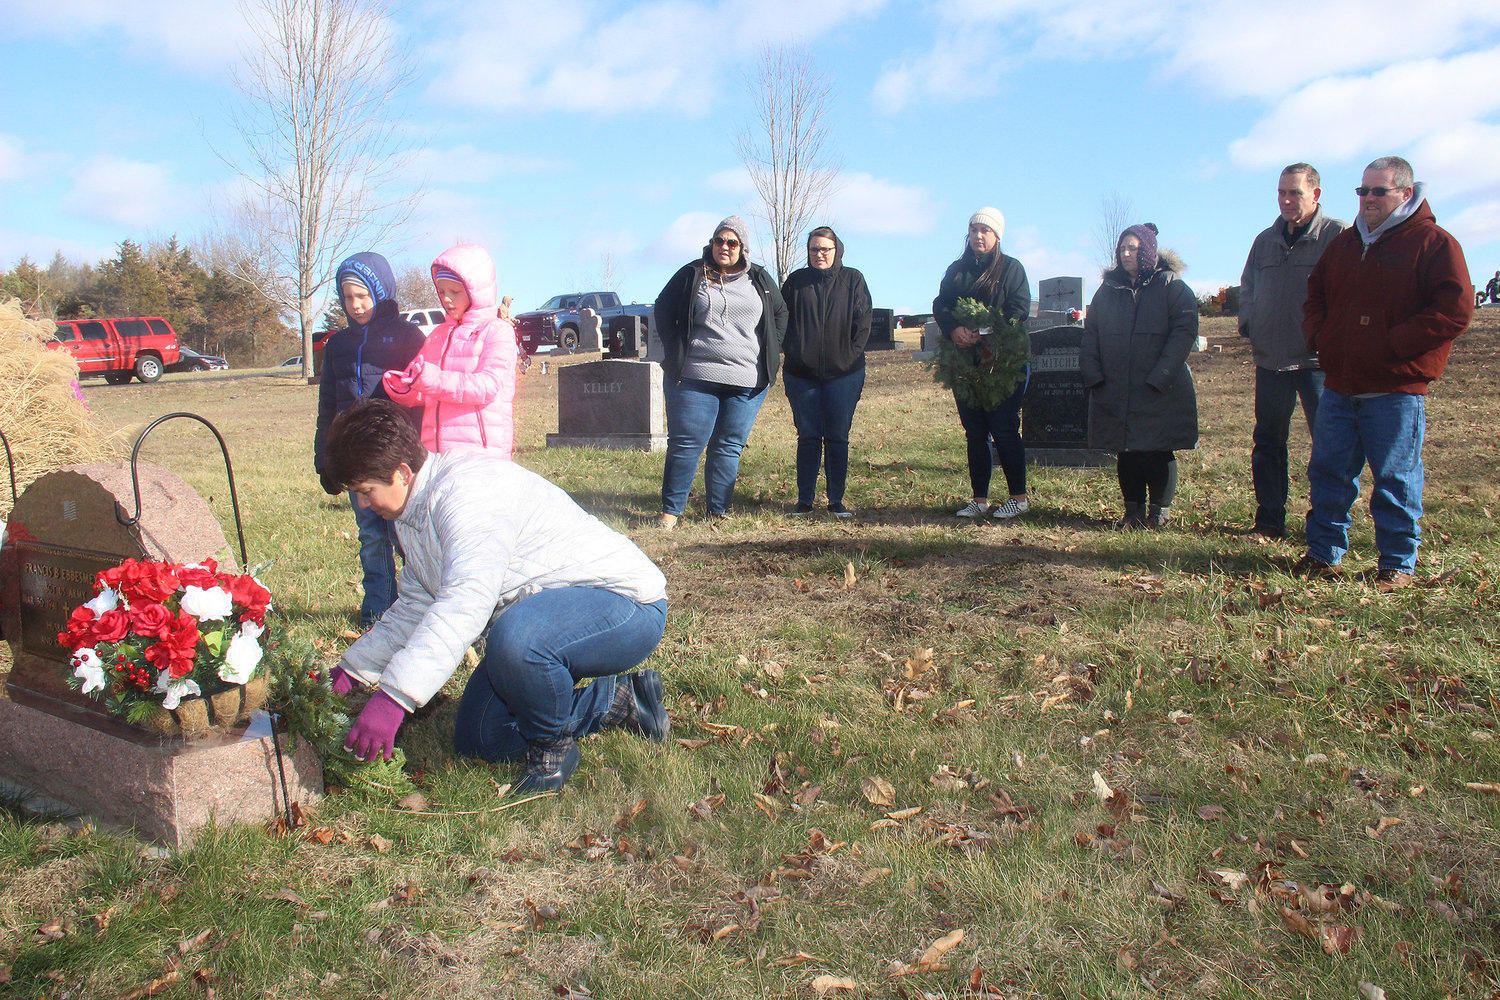 GENERATIONS REMEMBER — The family of deceased veteran Frank Ebbesmeyer lay a wreath at his grave in the Holy Rosary Cemetery during the Wreaths Across America program on Dec. 17. Wreaths were laid at the graves of more than 500 local veterans to honor their service and teach new generations about their importance.